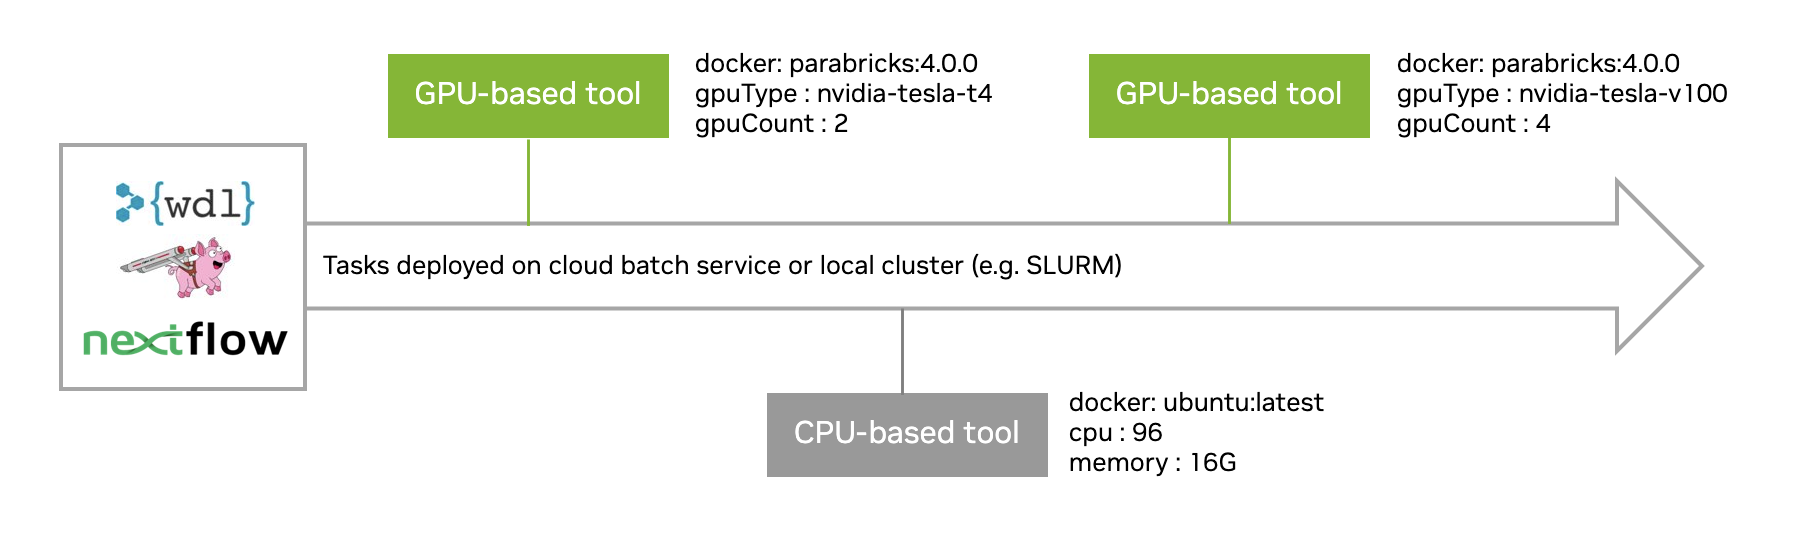 A diagram showing how to pull directly from the Clara Parabricks Docker and specify gpuType and gpuCount compute requirements.
